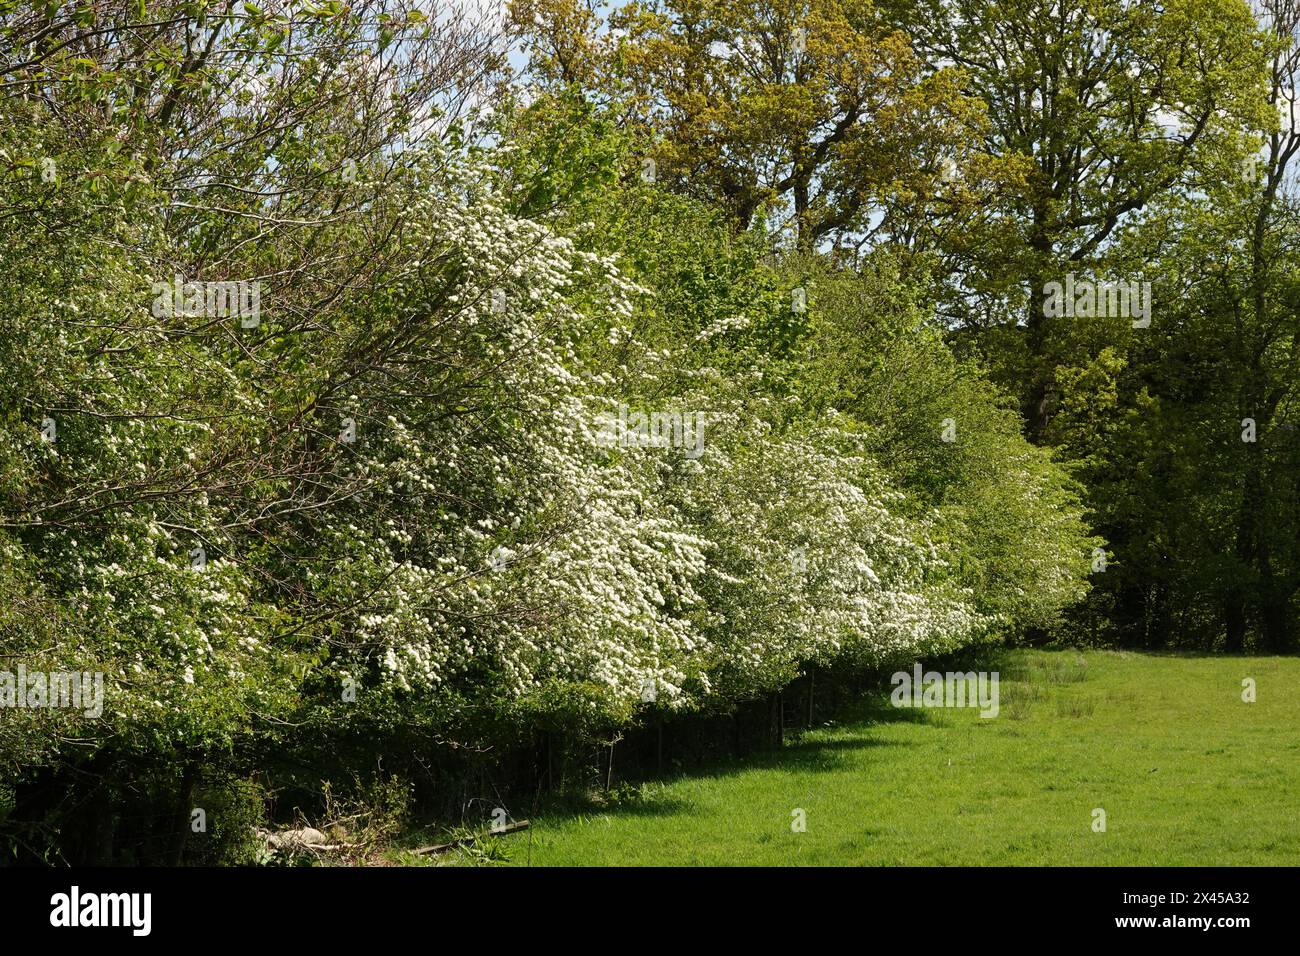 Spring UK, Large Hedge in Blossom Stock Photo